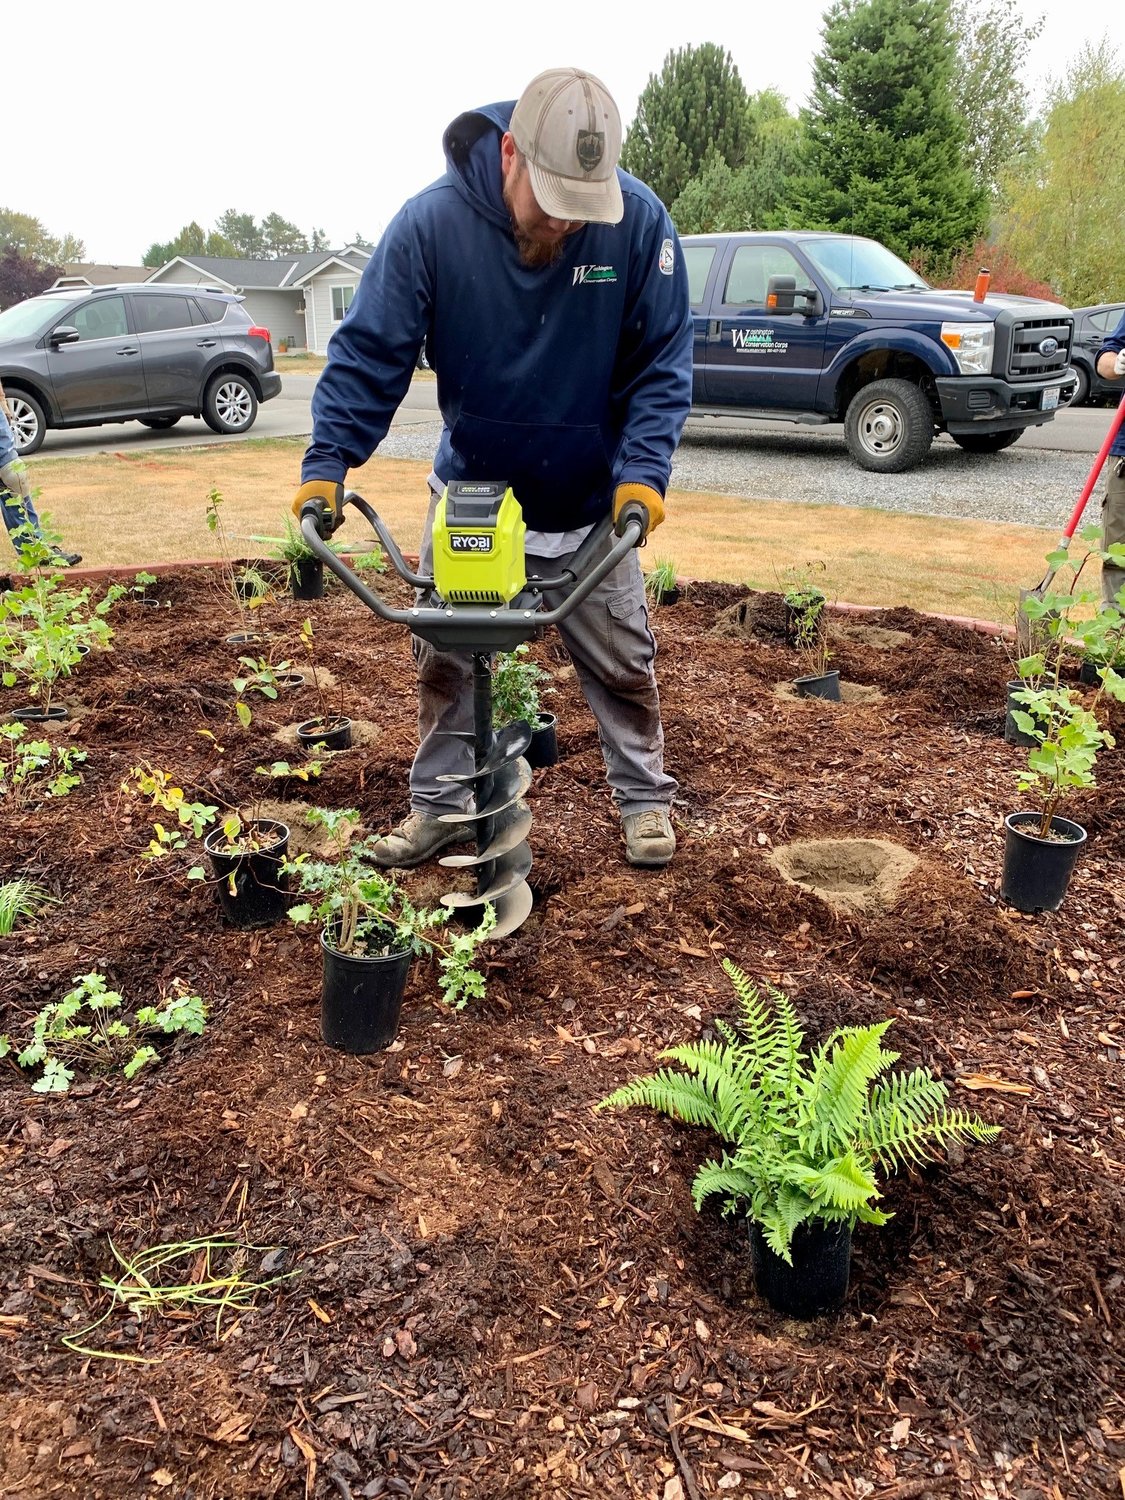 Native landscaping program offered to Birch Bay residents again